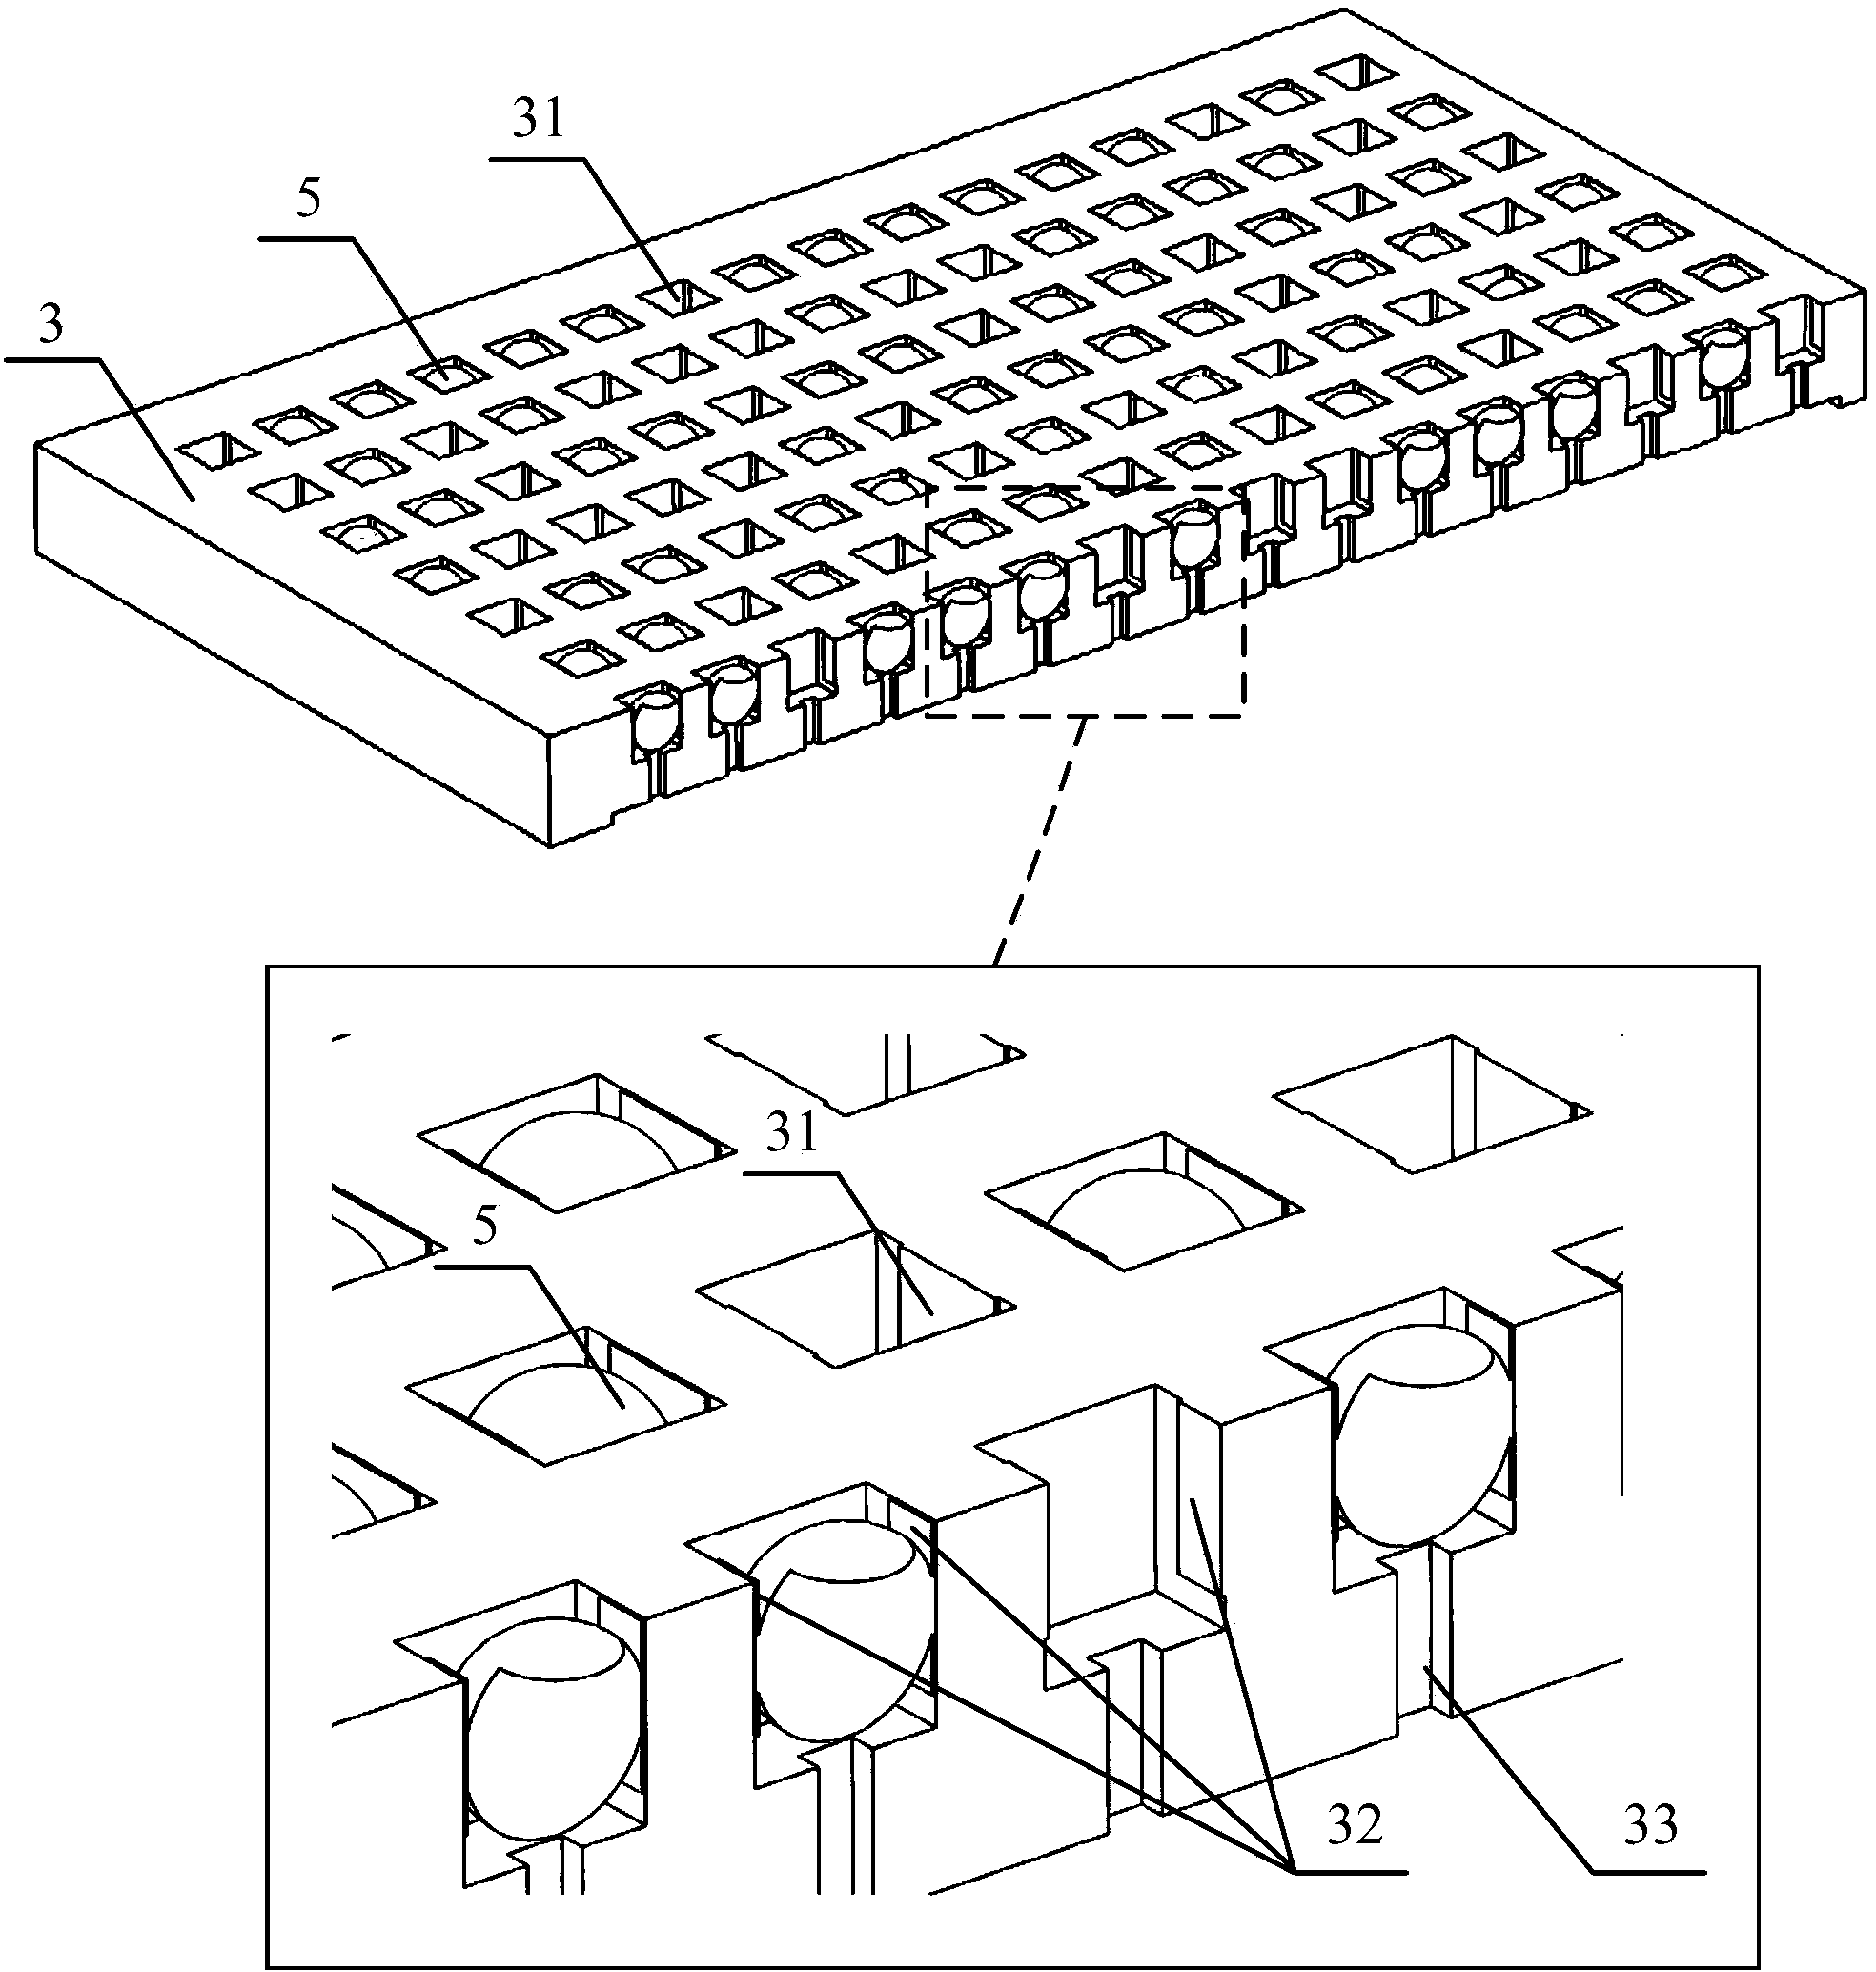 Micro-fluidic chip and micro-fluidic chip system for single cell analysis and single cell analyzing method